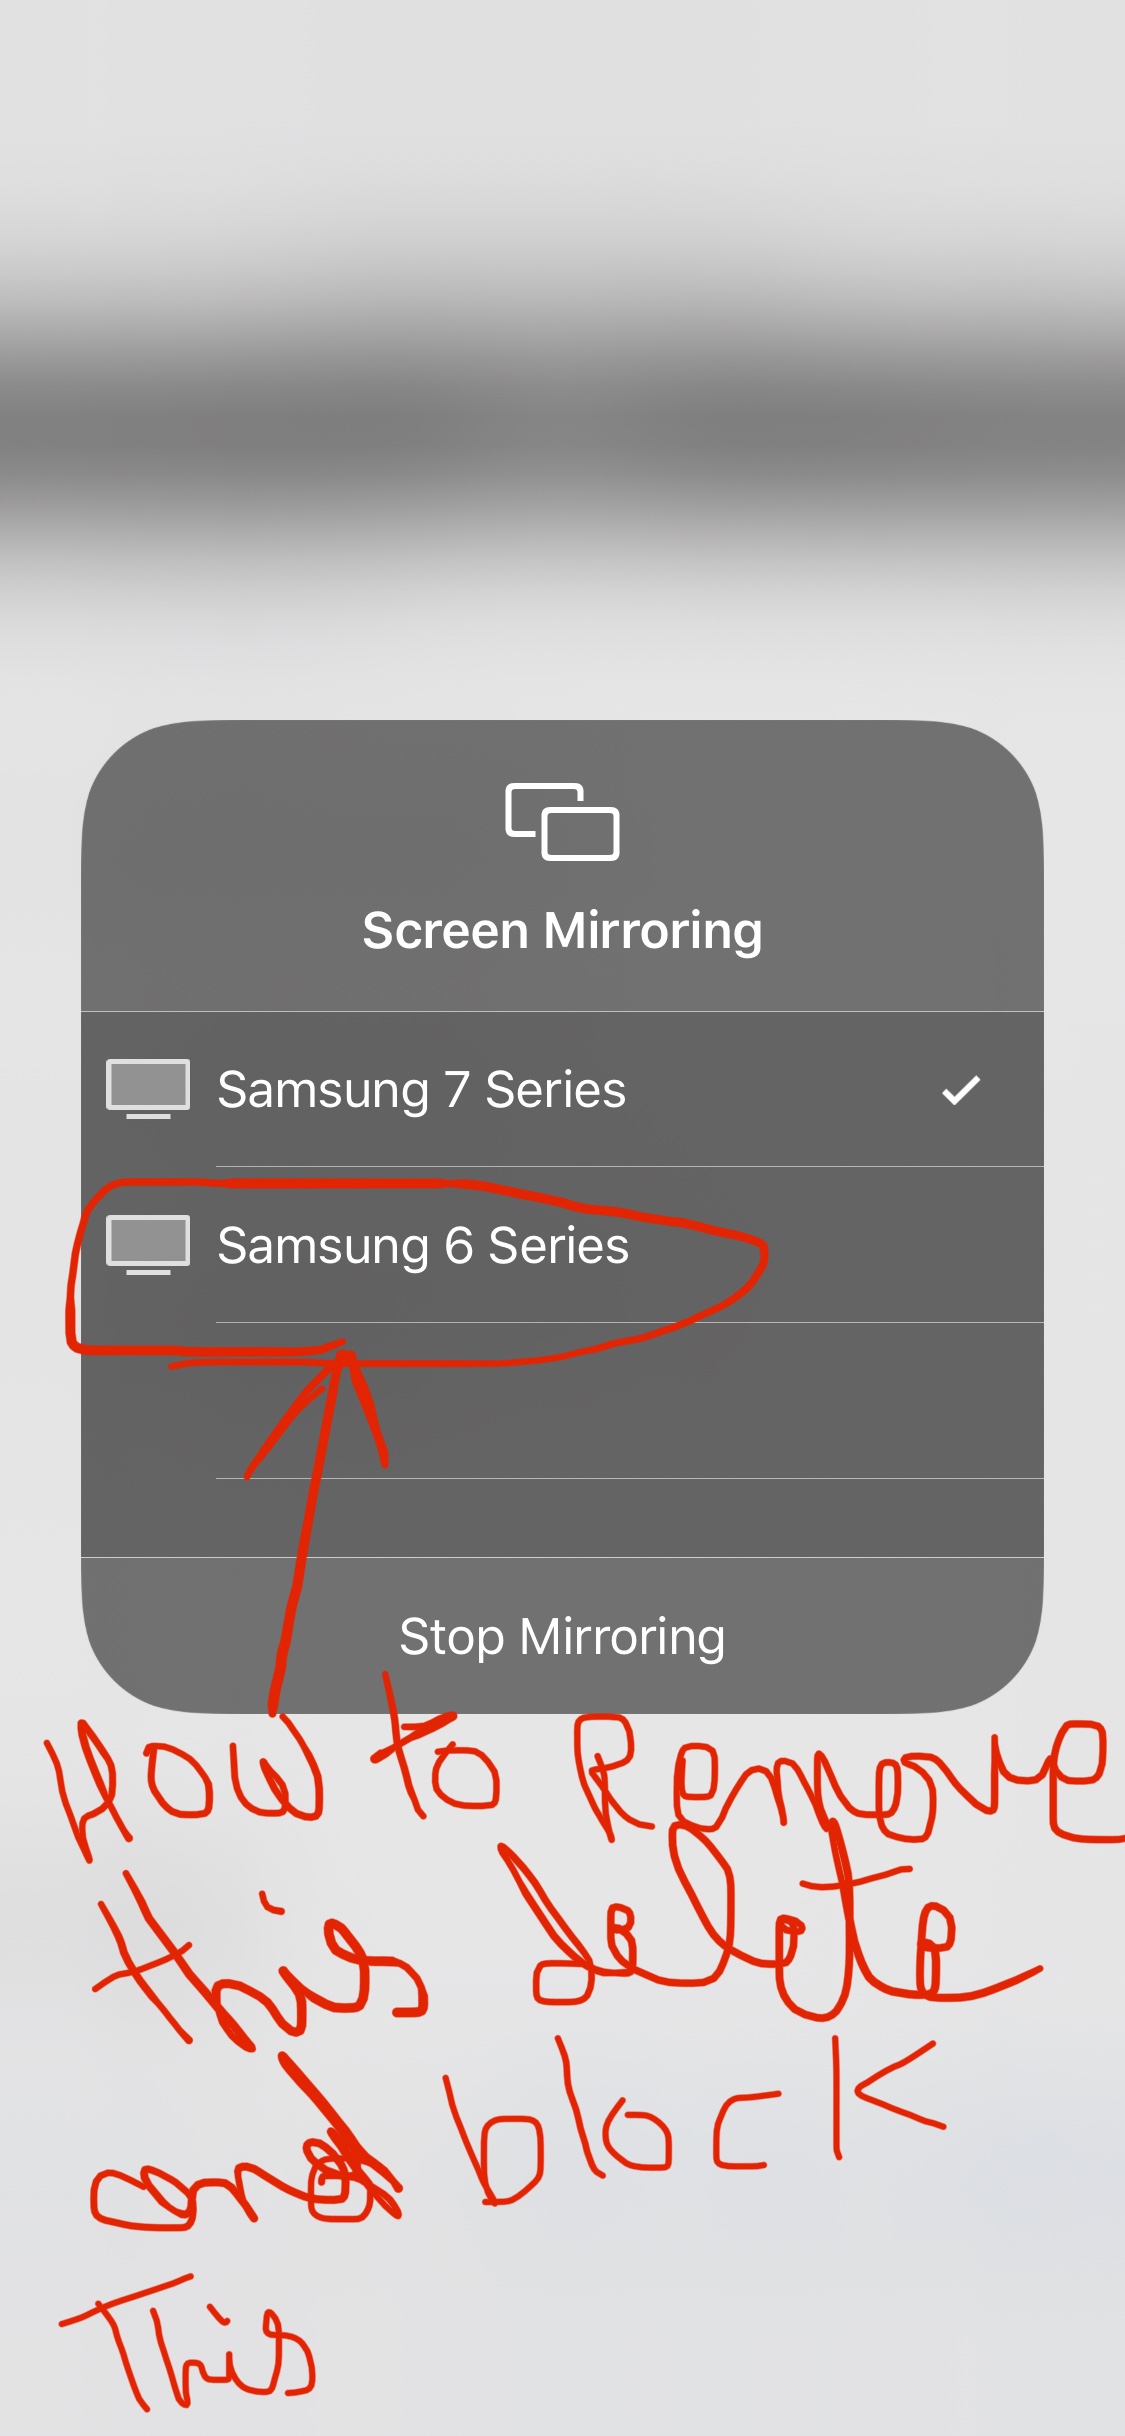 How To Remove Samsung Tv From Iphone, How To Remove Screen Mirroring On Ipad